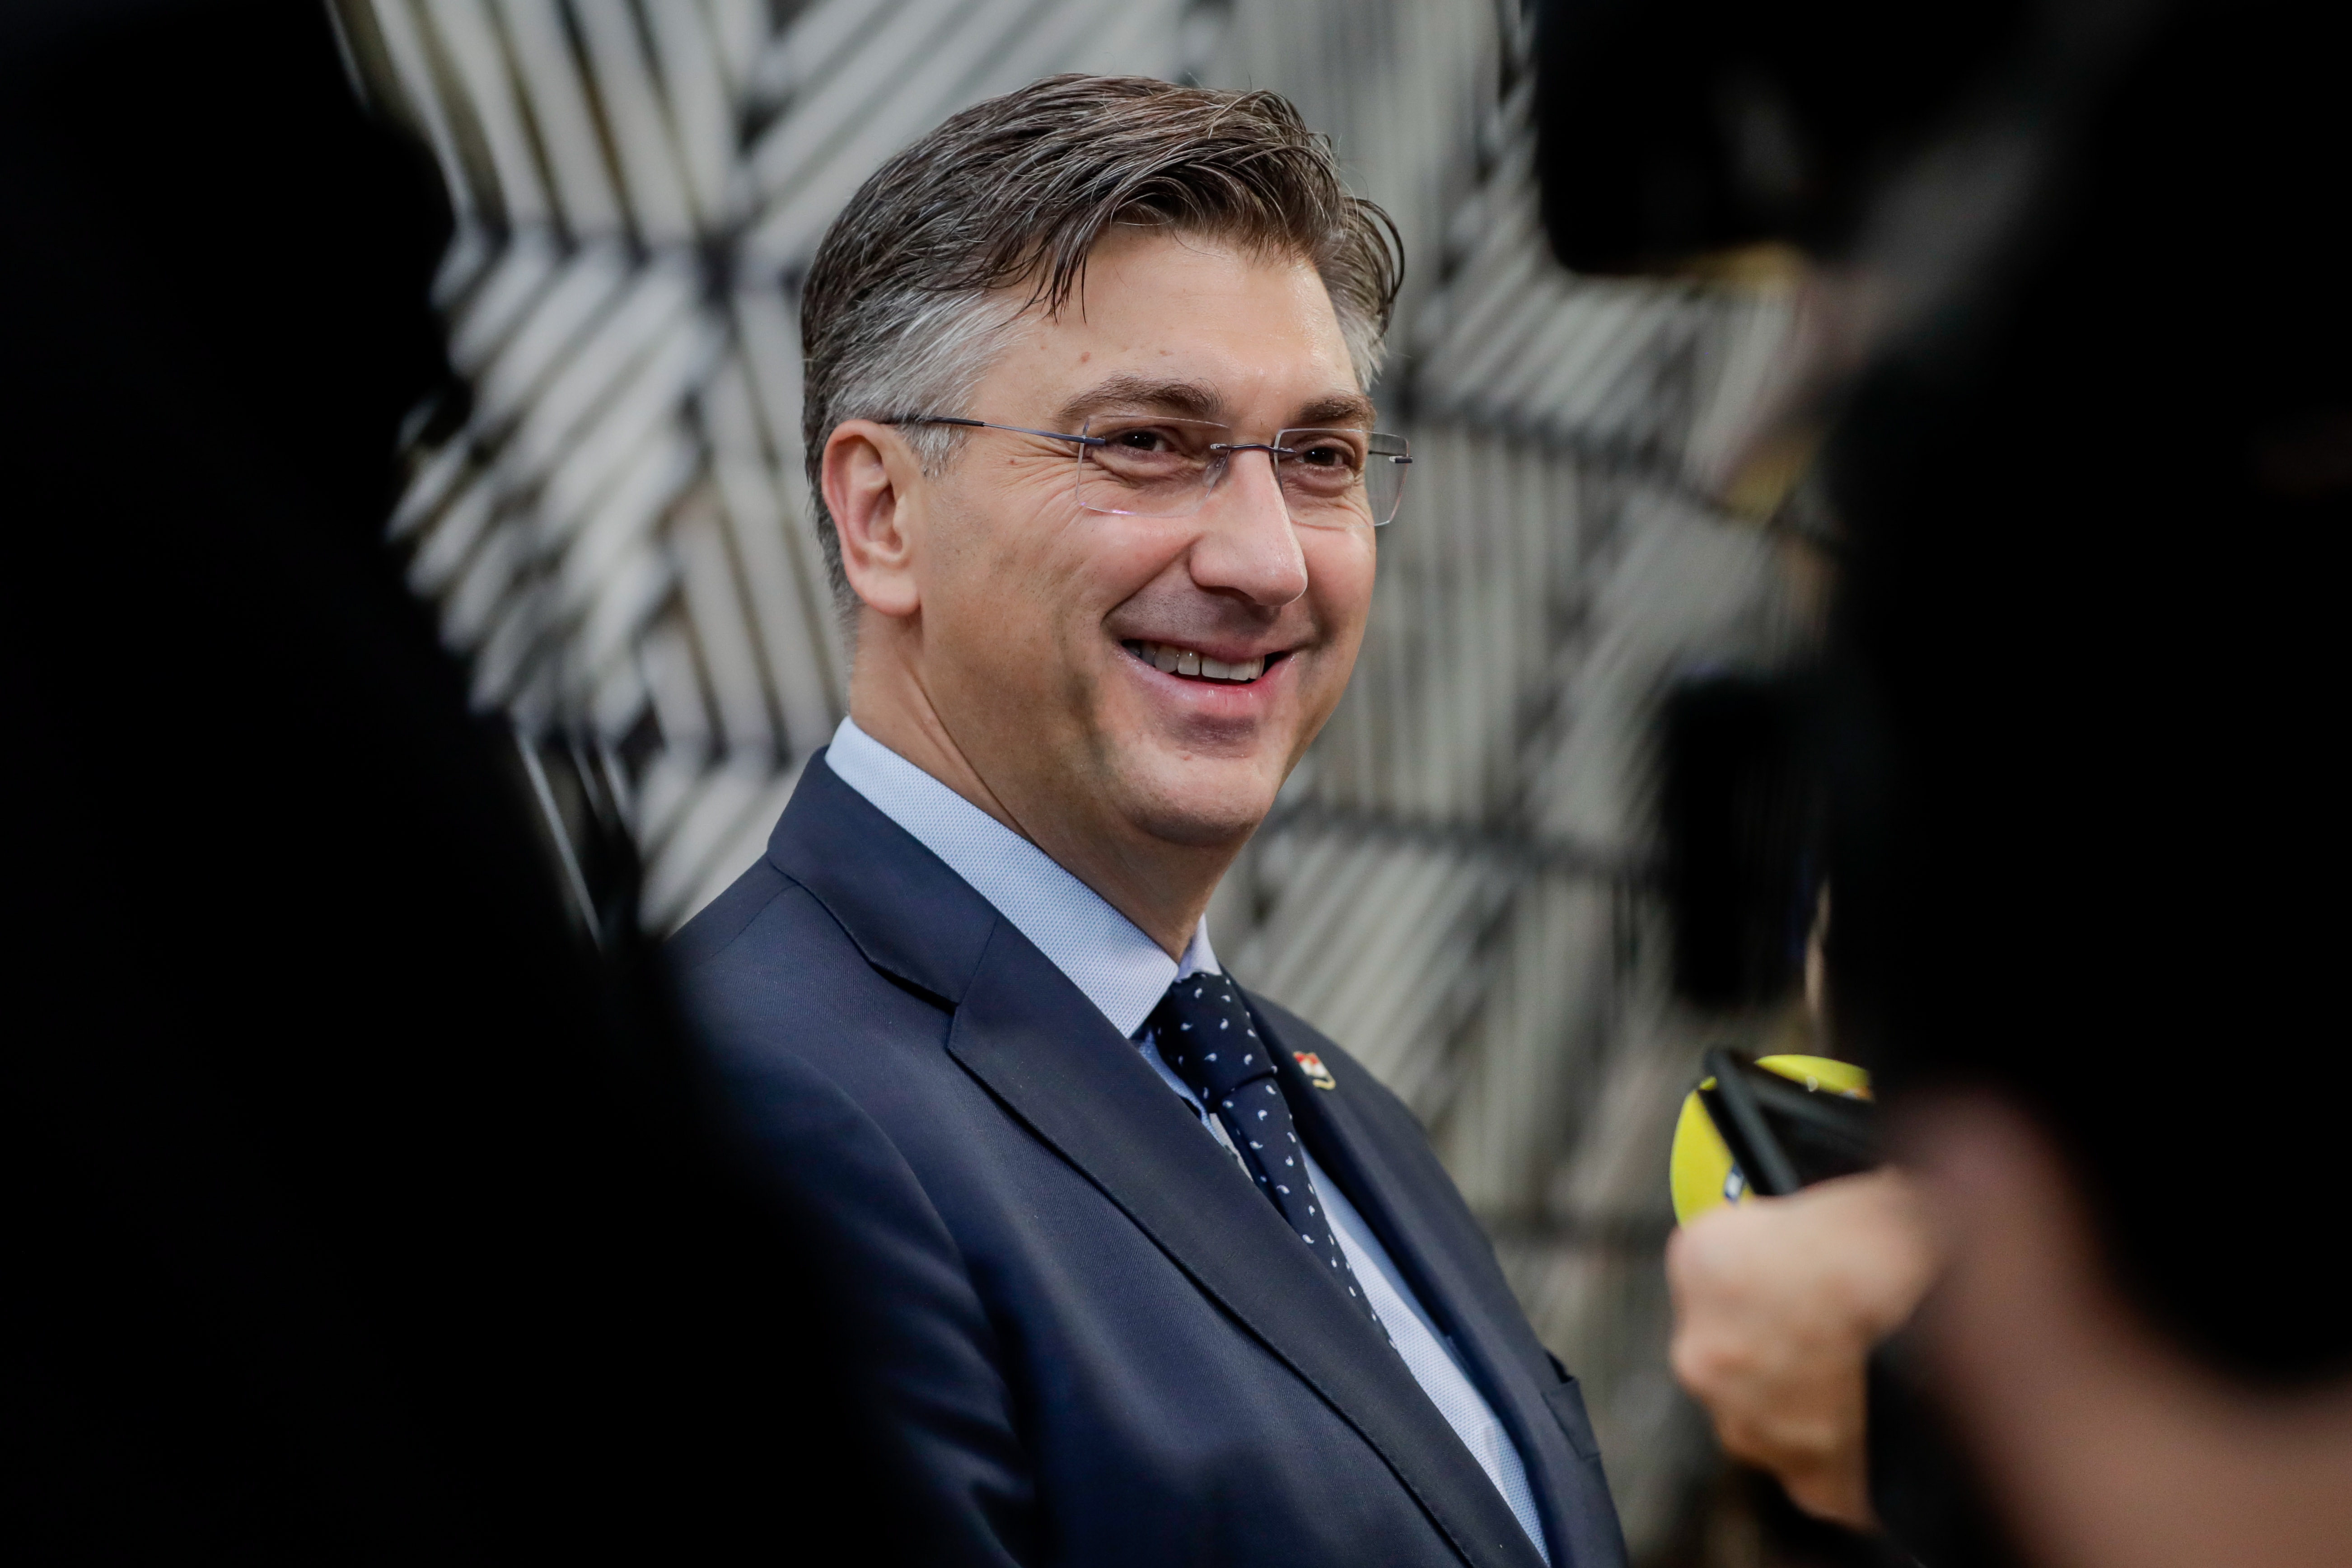 epa07929514 Croatian Prime Minister Andrej Plenkovic  arrives at the second day of a European Summit at the European Council in Brussels, Belgium, 18 October 2019.  The European Union (EU) and the British government have reached a tentative Brexit deal that still must be ratified.  EPA/STEPHANIE LECOCQ